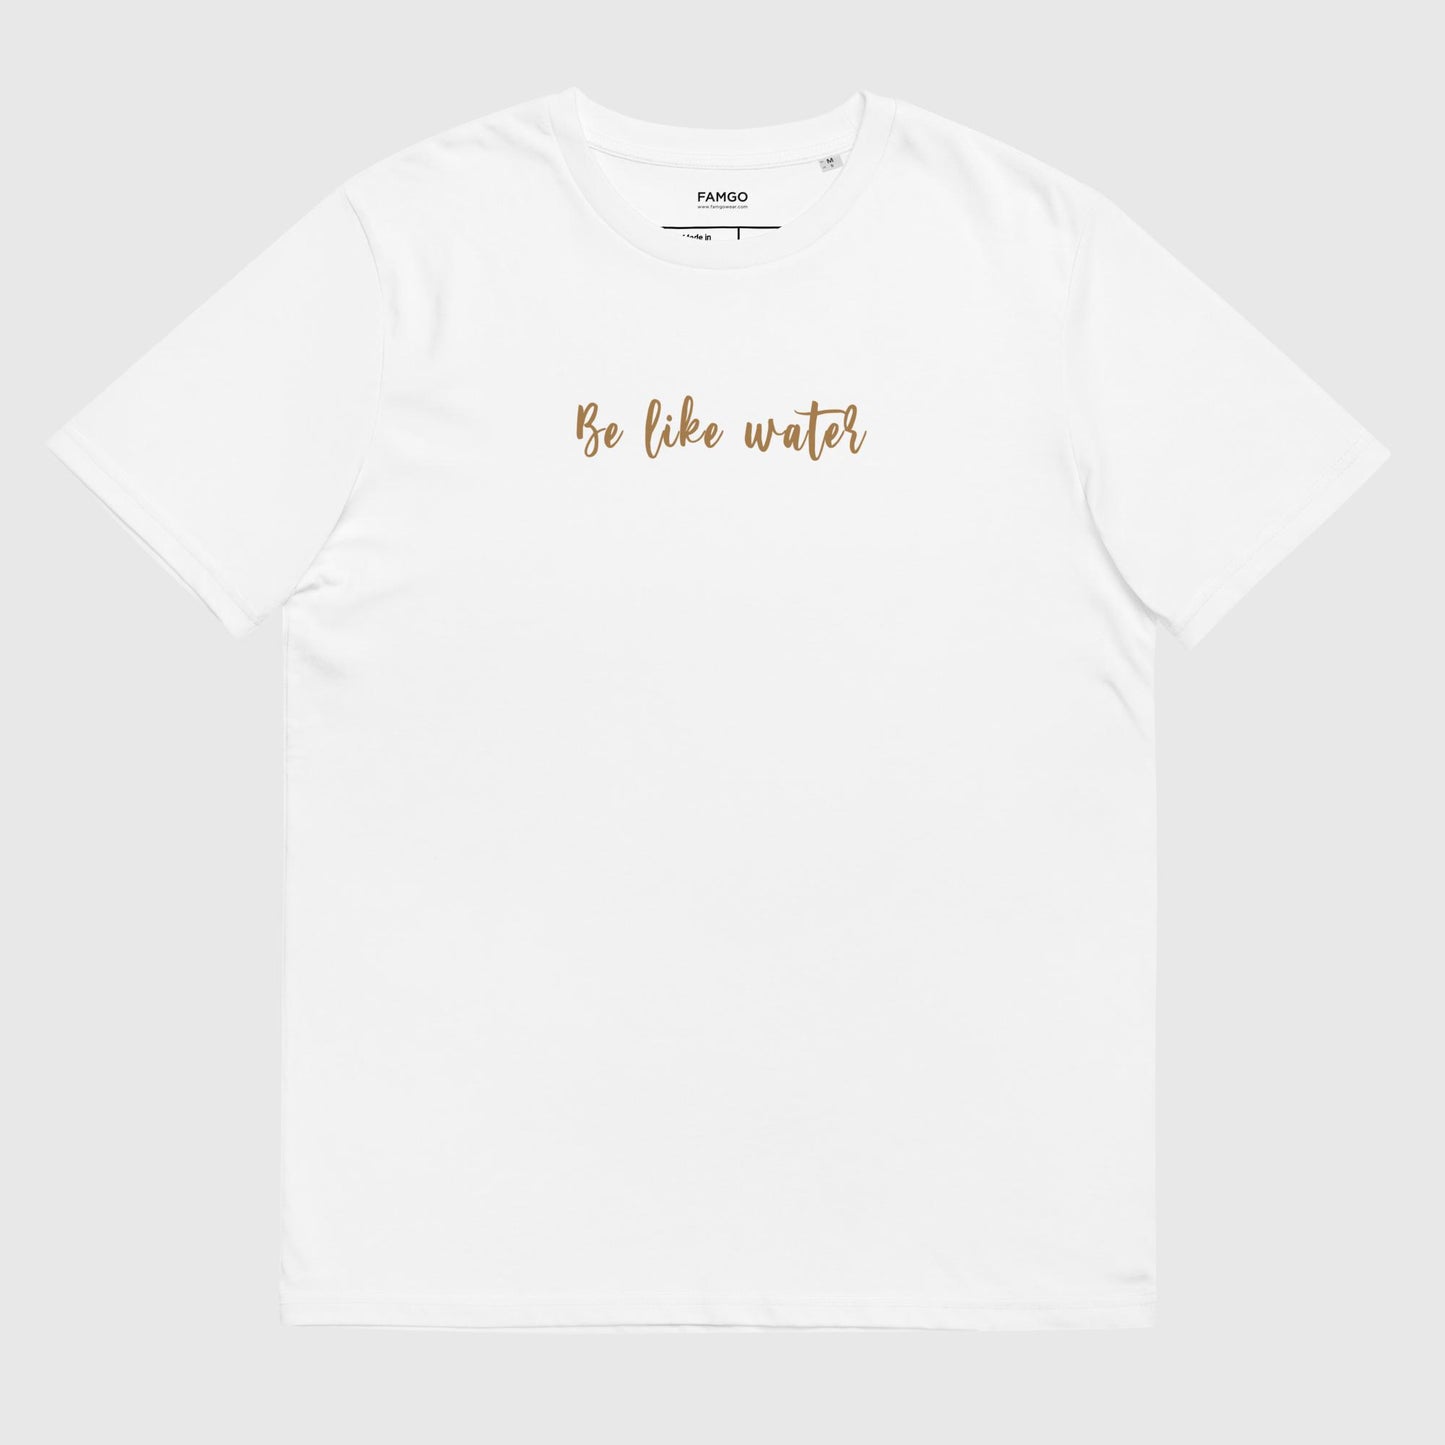 Men's white organic cotton t-shirt that features Bruce Lee's inspirational quote, "Be Like Water."